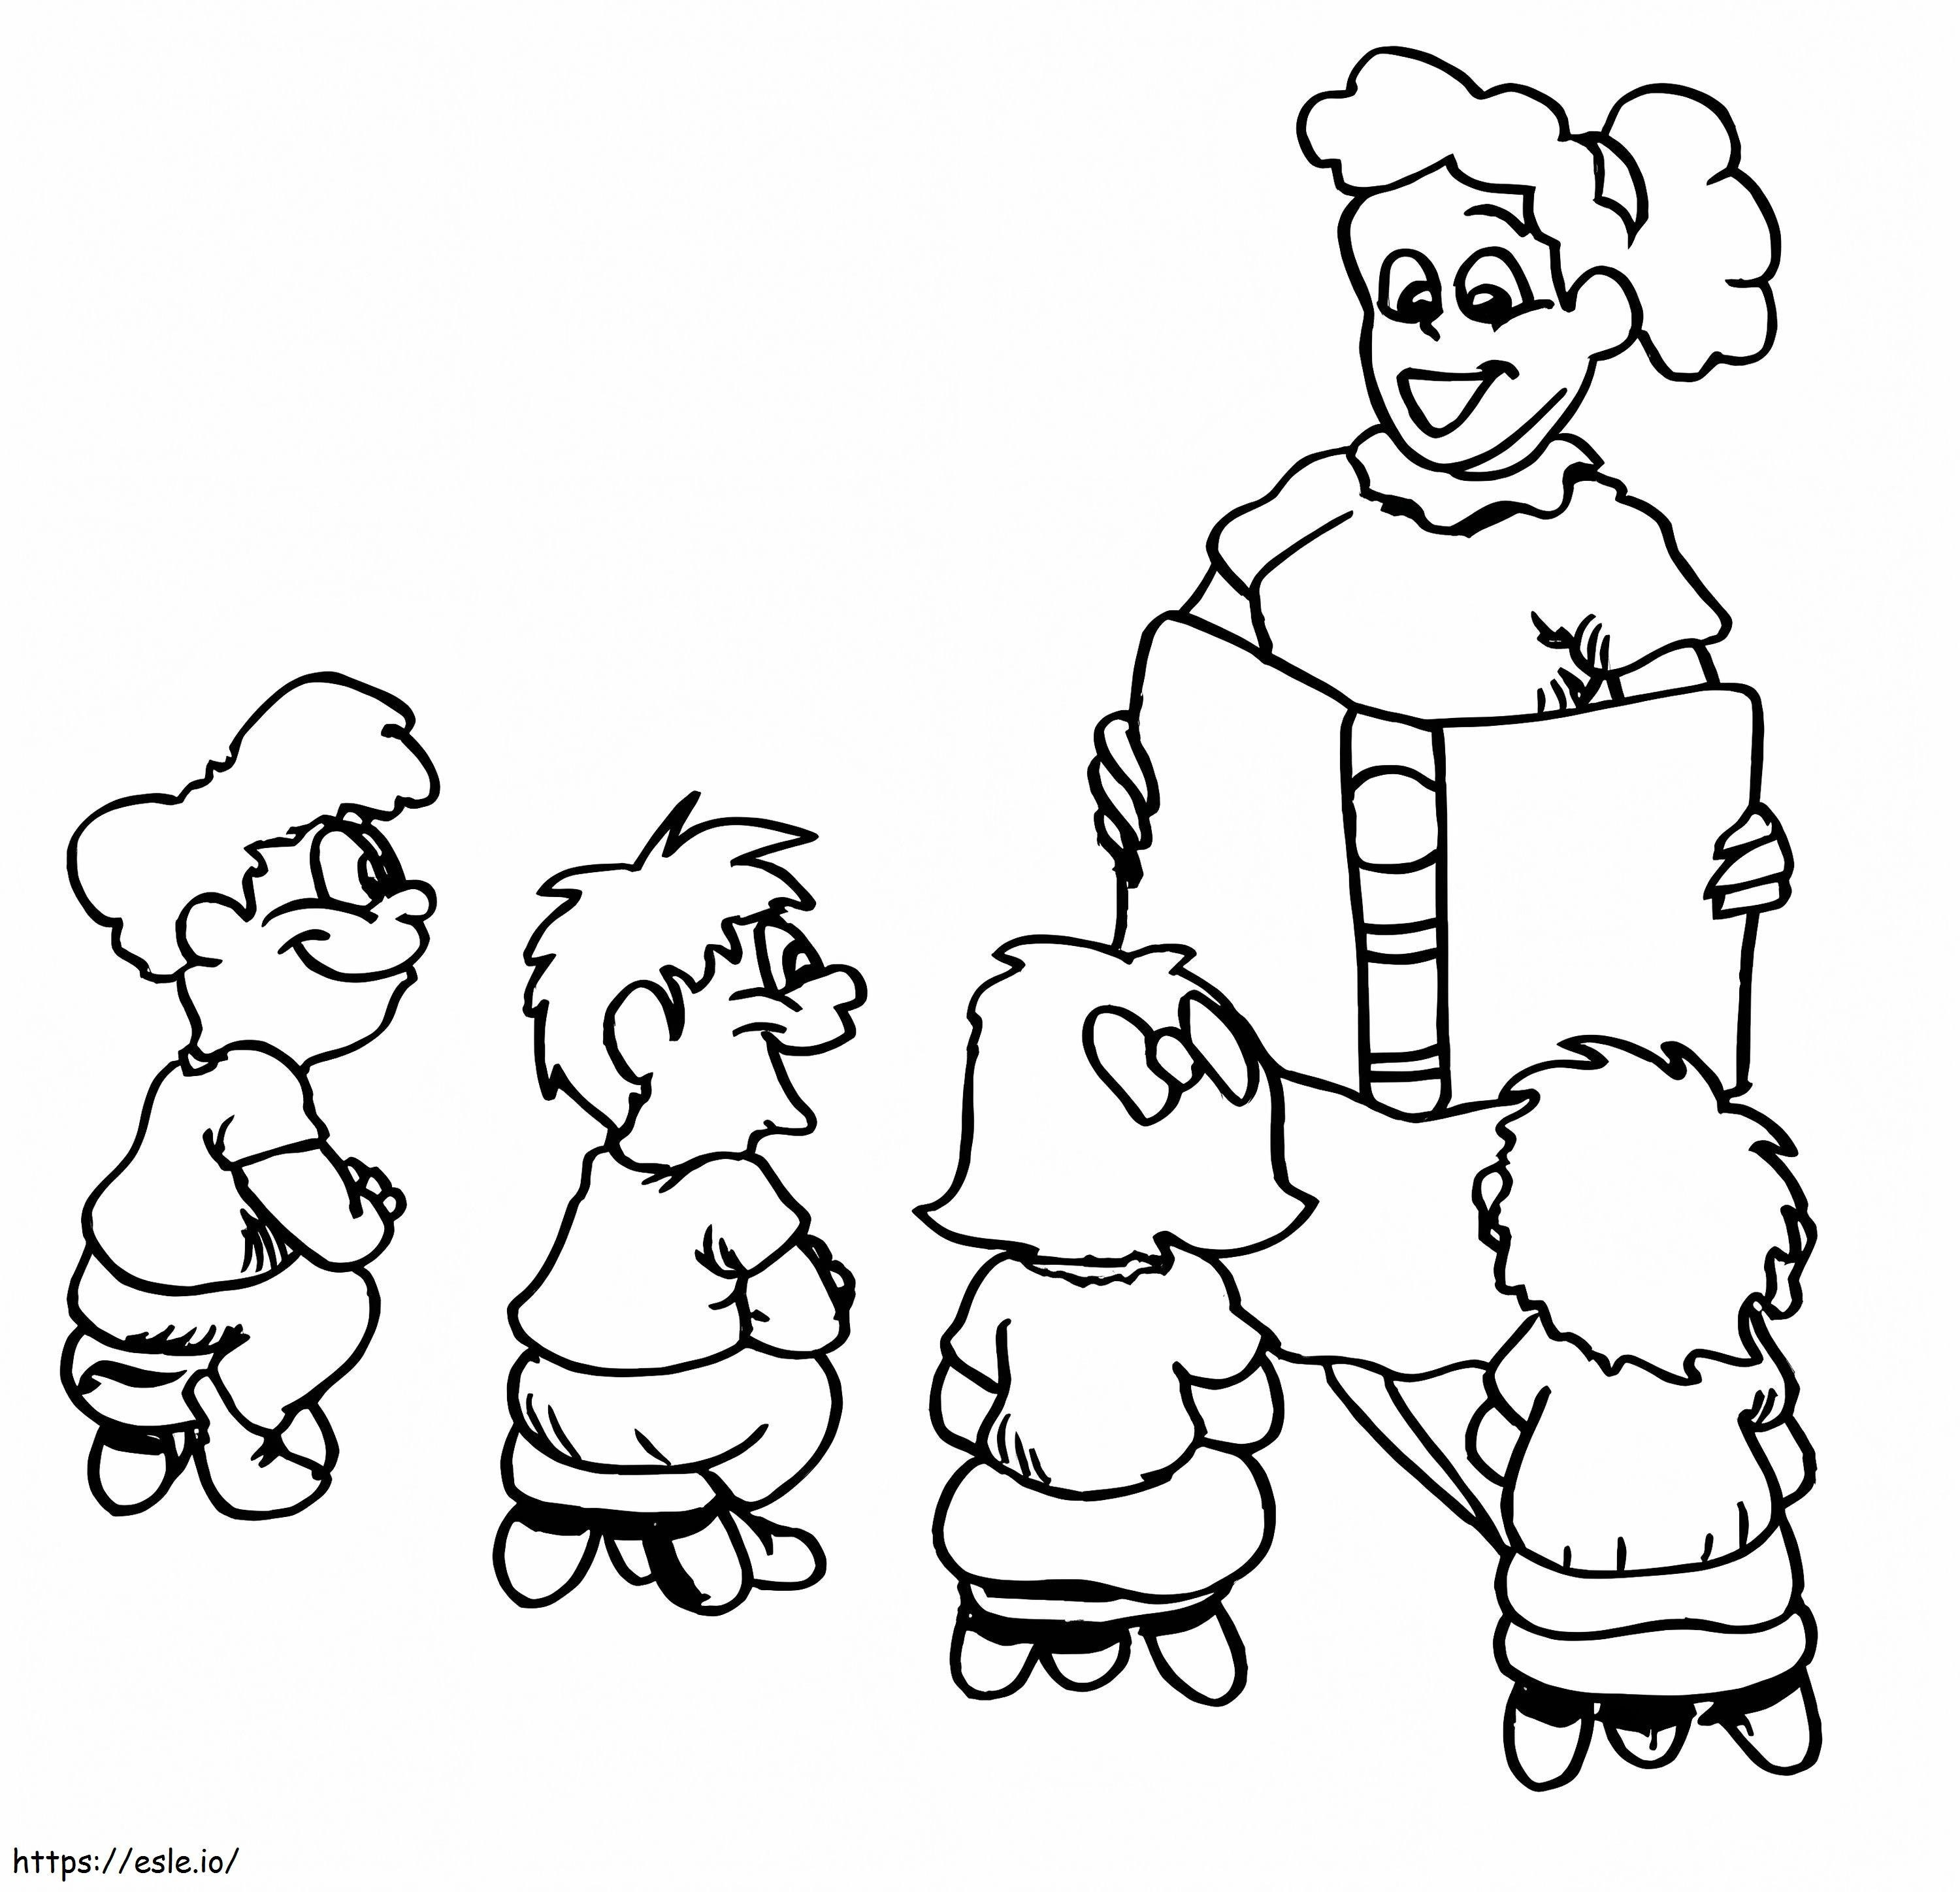 Teacher Smiling coloring page